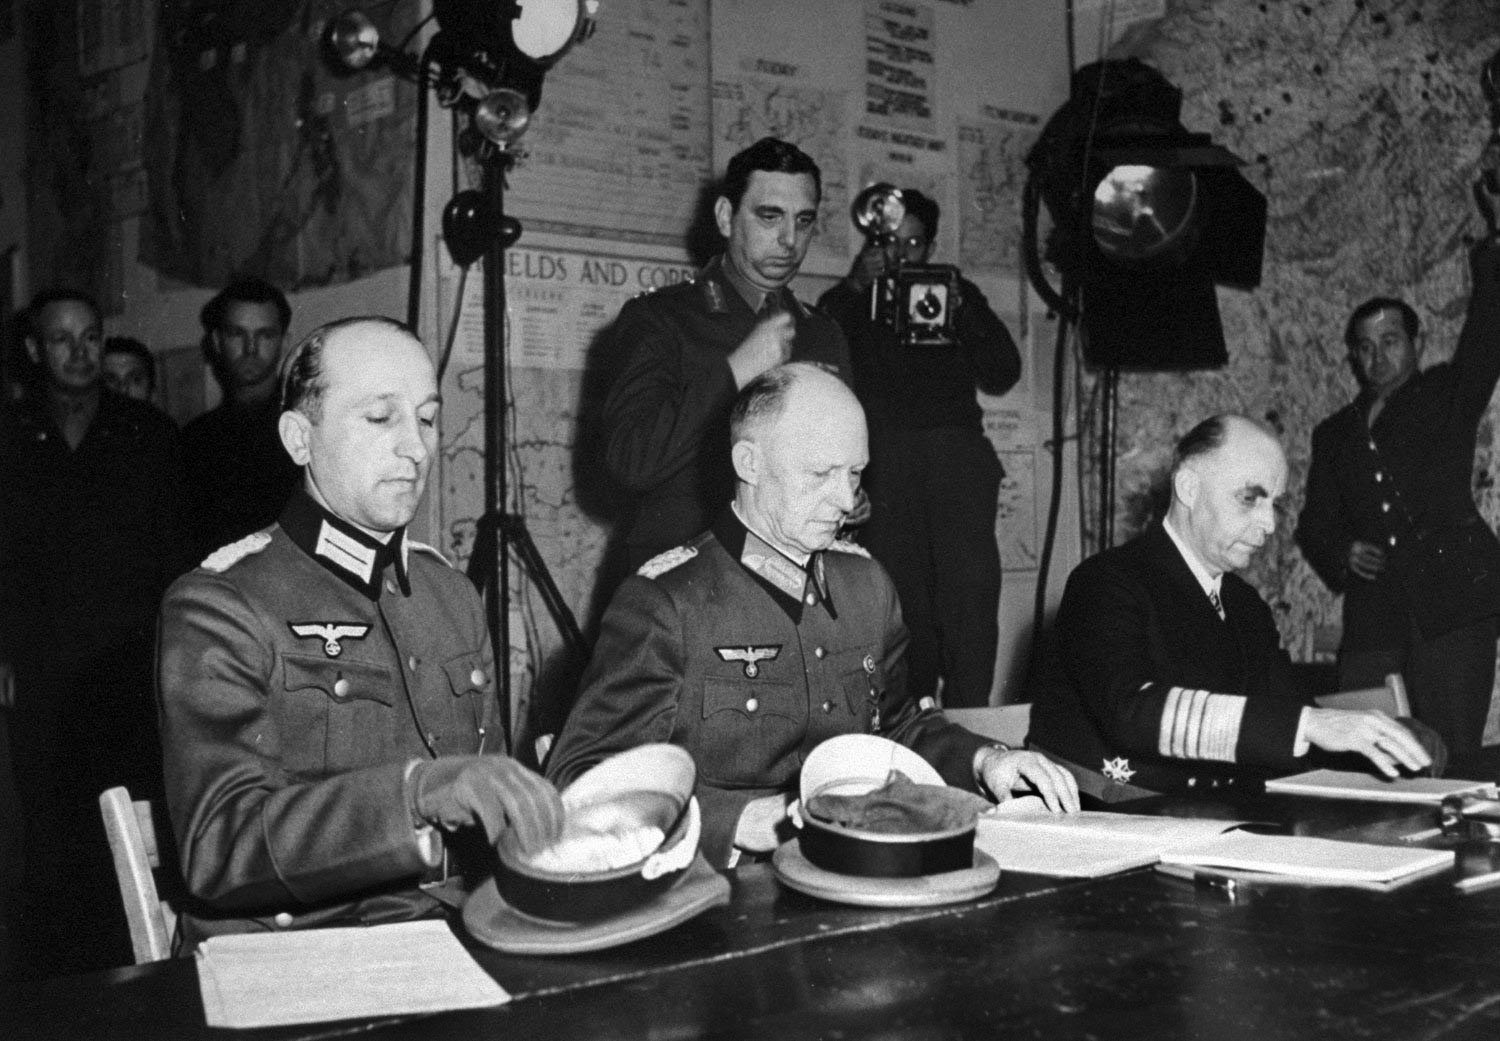 Colonel General Alfred Jodl (center), later convicted and hanged as a war criminal at Nuremberg, prepares to sign the instrument of surrender at General Dwight Eisenhower’s headquarters in Reims, France, at 2:39 AM on May 7, 1945. Major Wilhelm Oxenius and Admiral Hans-Georg Friedeburg are seated to Jodl’s left and right respectively.